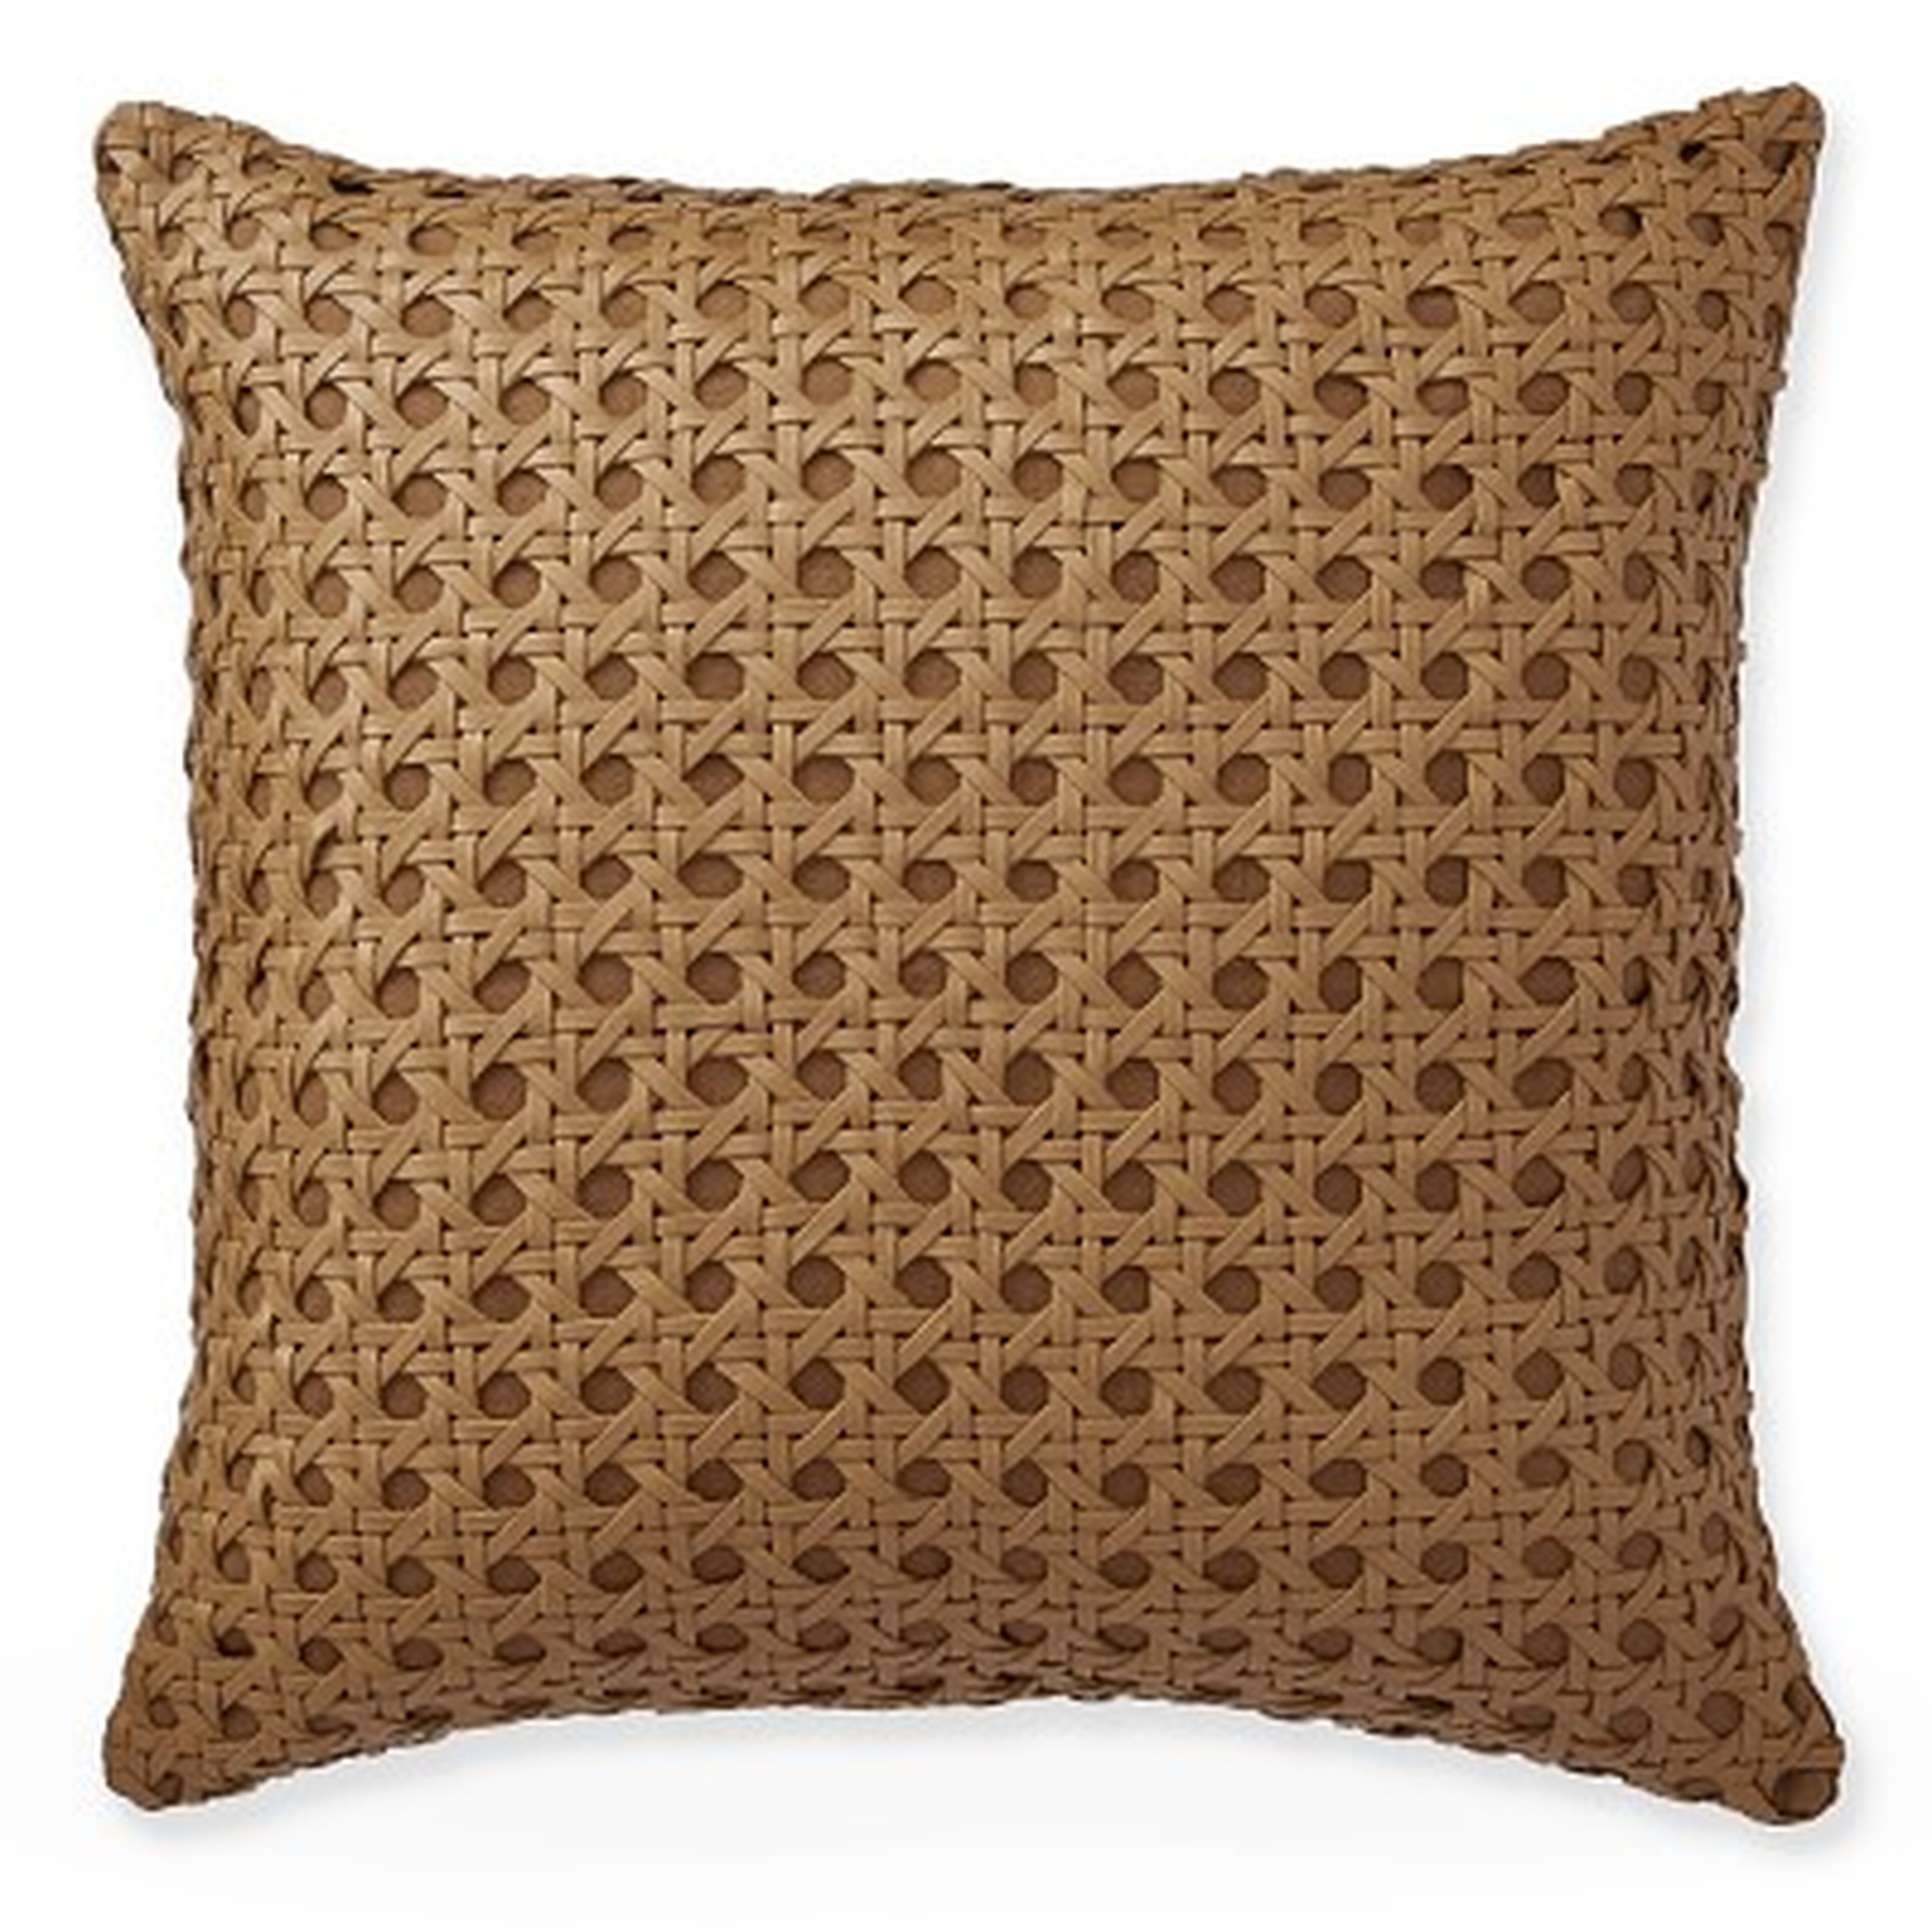 Cane Woven Leather Pillow Cover, 20" X 20", Tan - Williams Sonoma